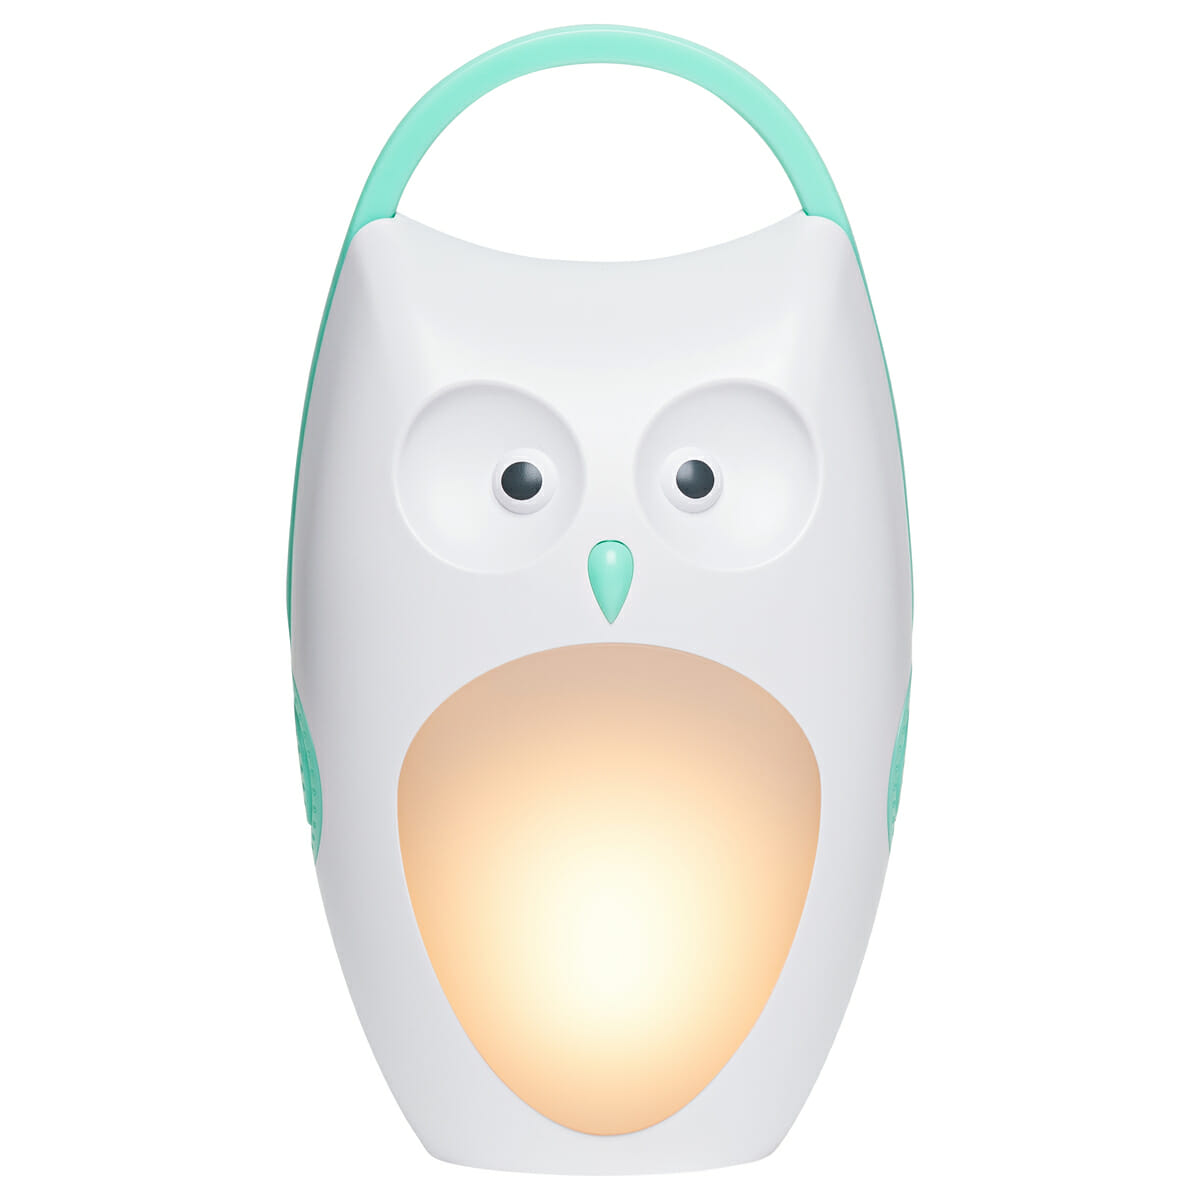 Oricom Portable Sound Soother With Night Light Owl 2